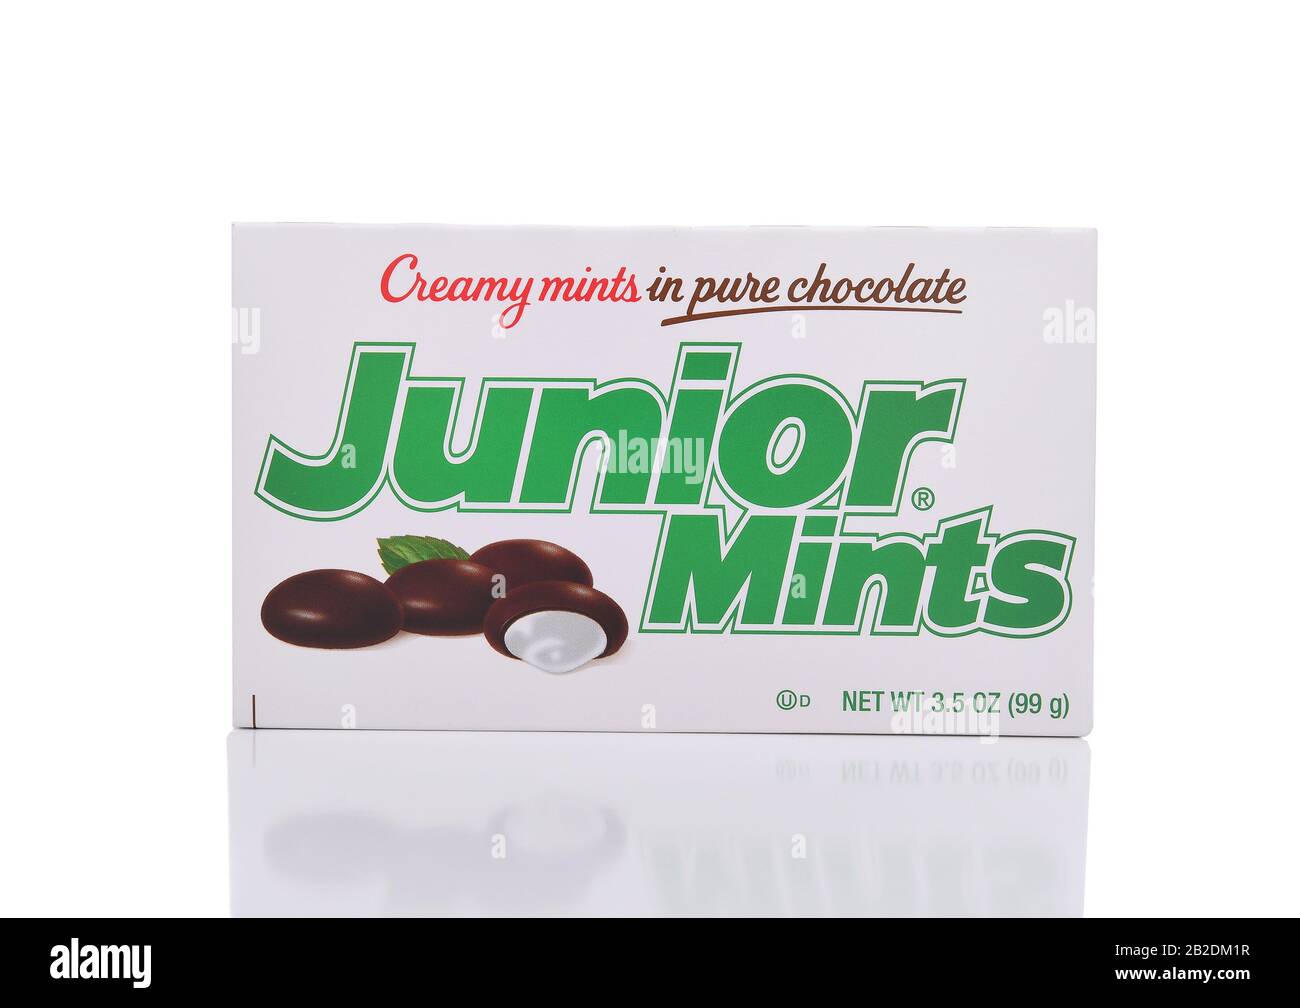 IRVINE, CALIFORNIA - JANUARY 22, 2017: Junior Mints. The candy was introduced in 1949 in Cambridge, Massachusetts by the James O. Welch Company. Stock Photo